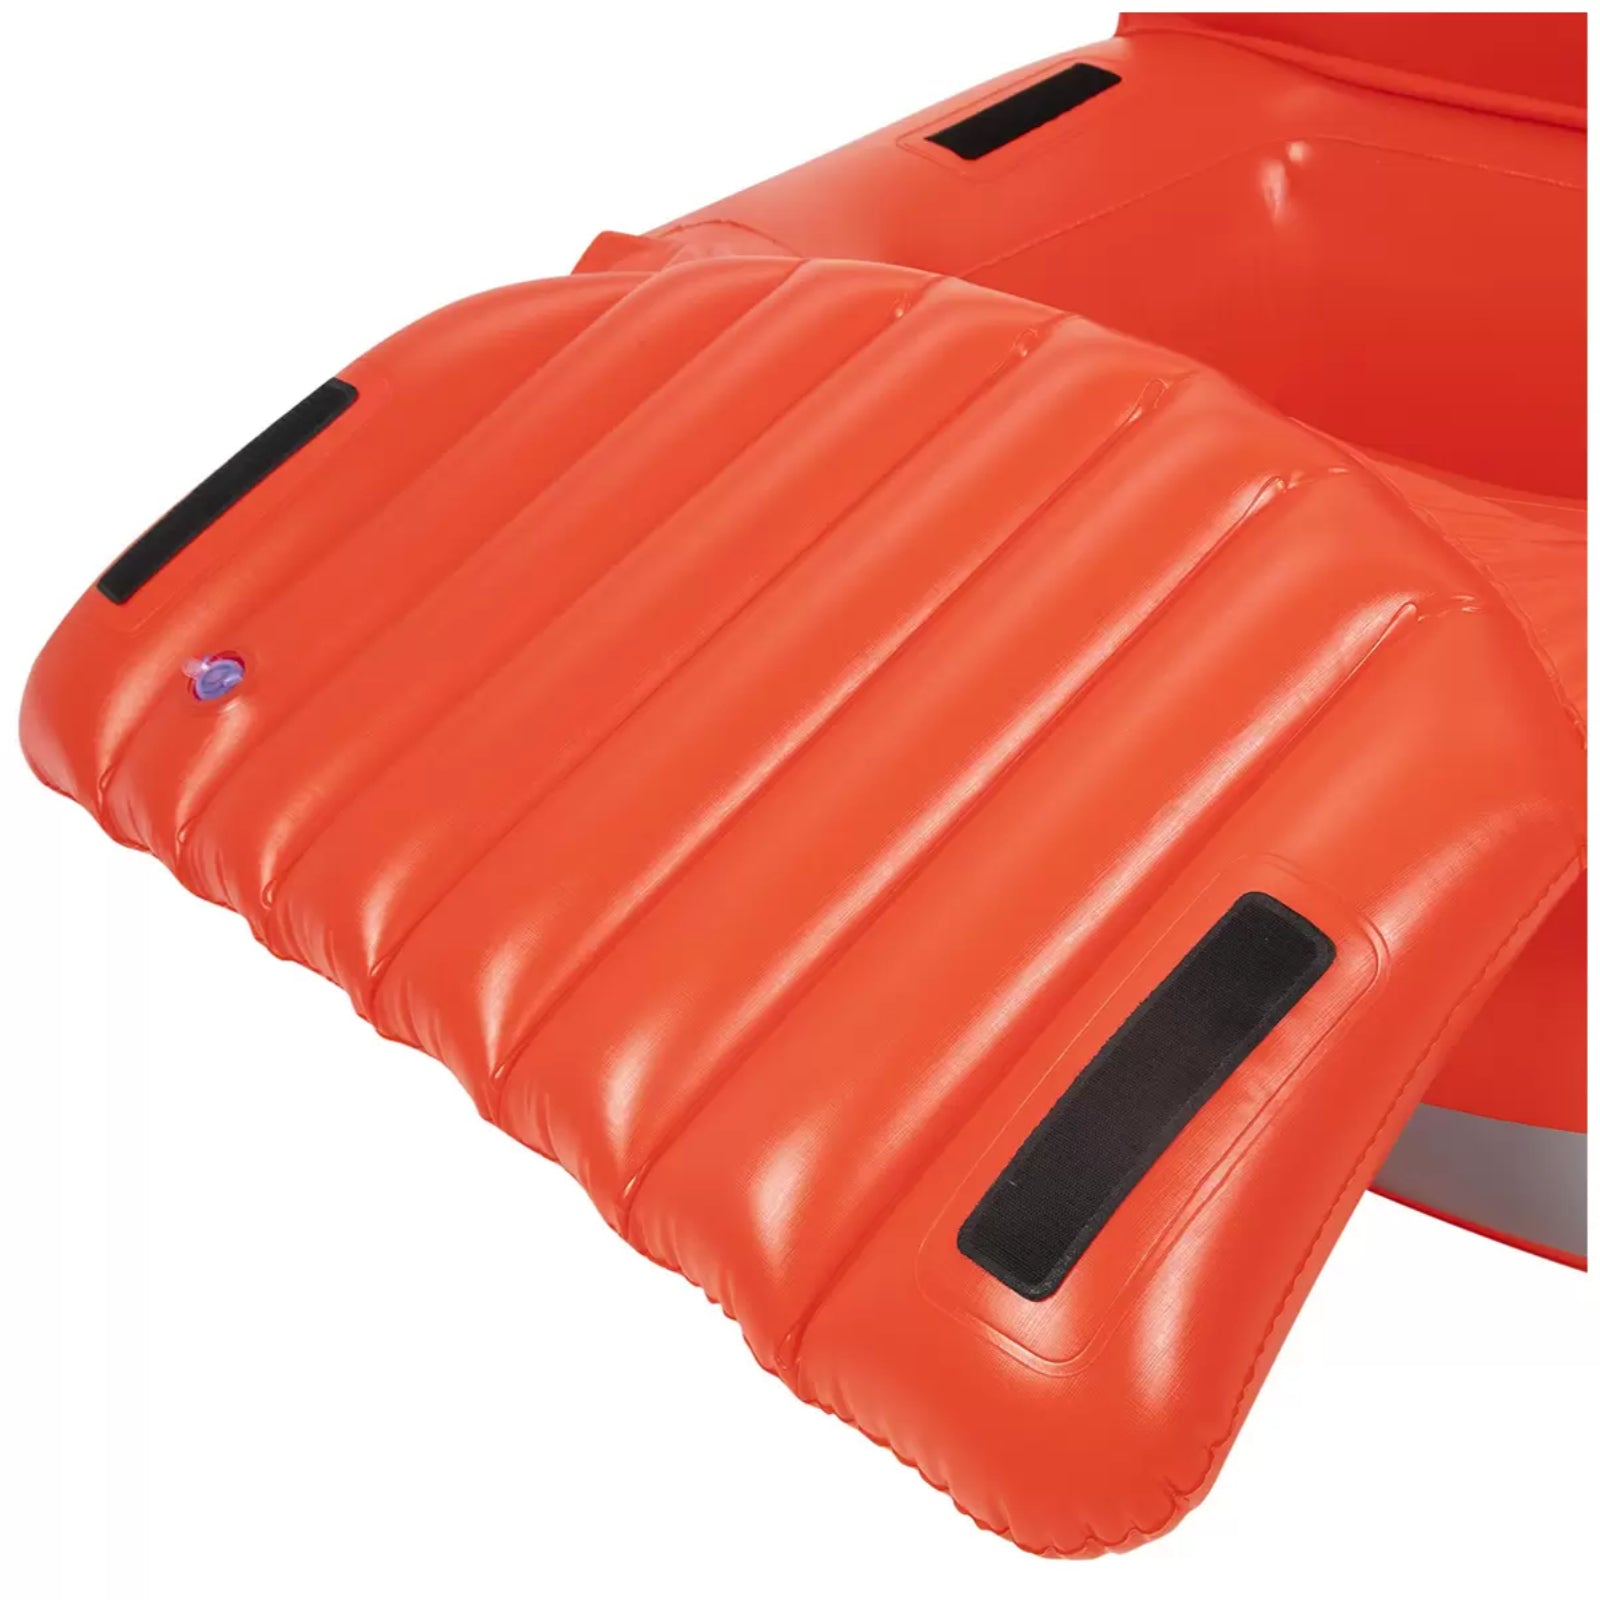 2.80m Giant Inflatable Pool Toys Big Red Truck Beach Bed Lounge INFLATABLES Swim POOL FLOAT Swimming - Homeware Discounts